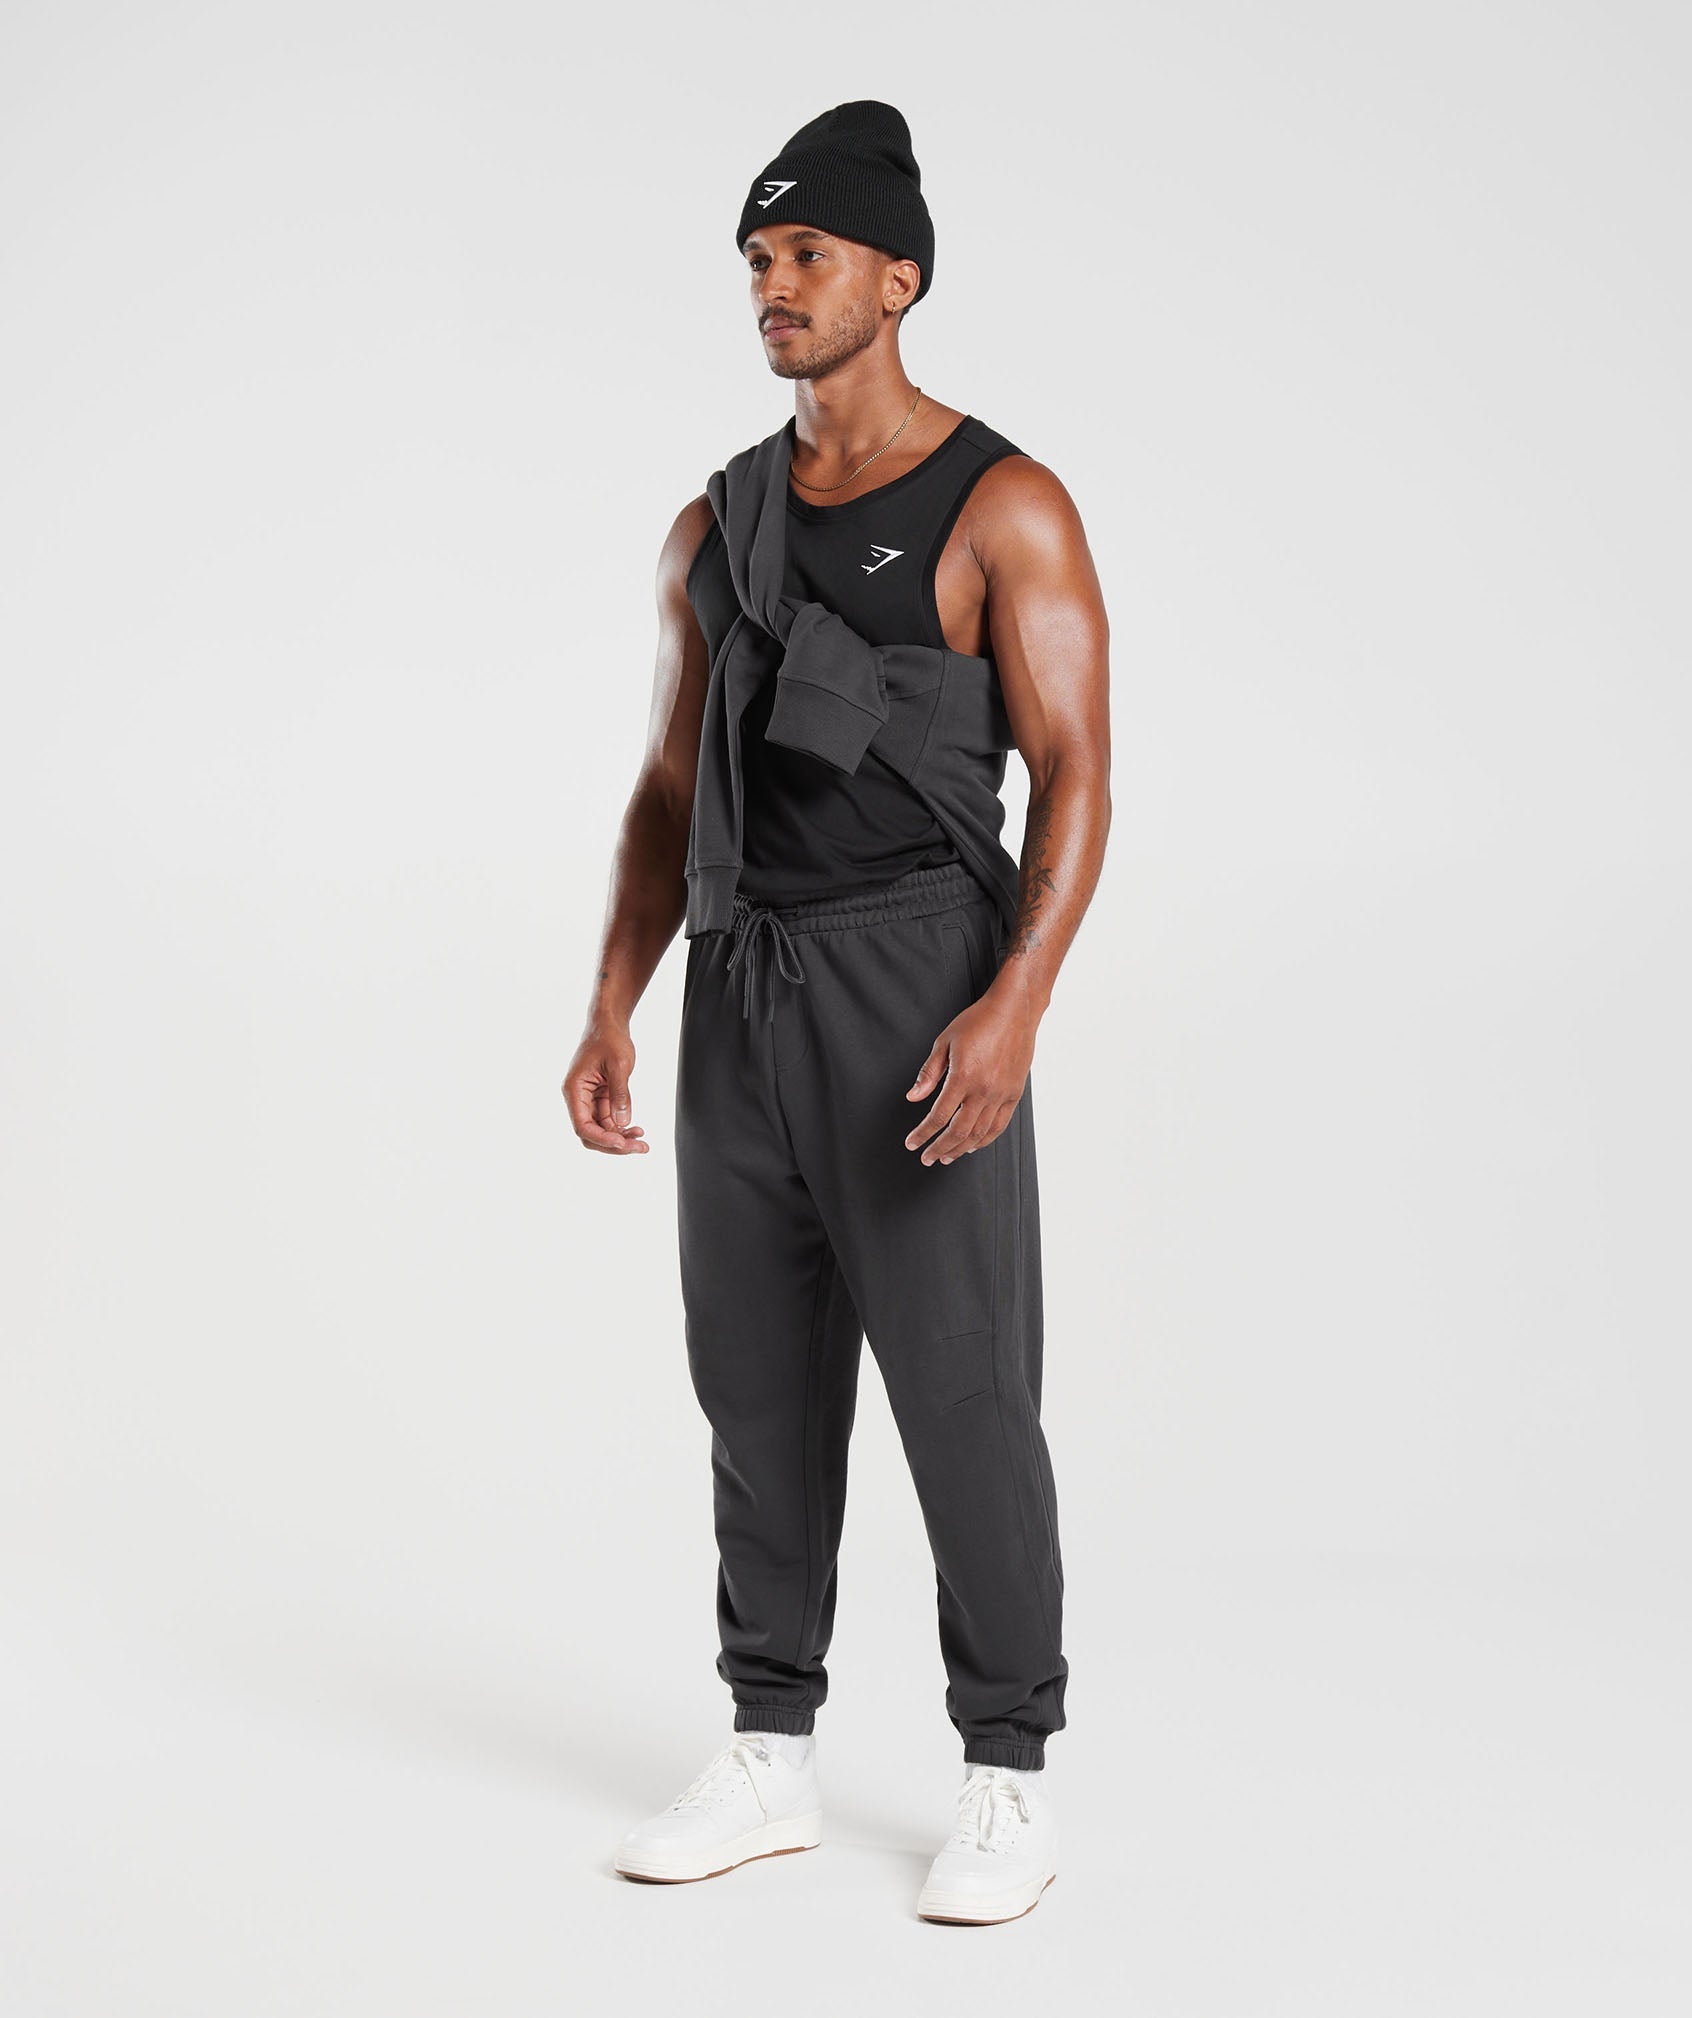 Rest Day Essentials Joggers in Onyx Grey - view 4